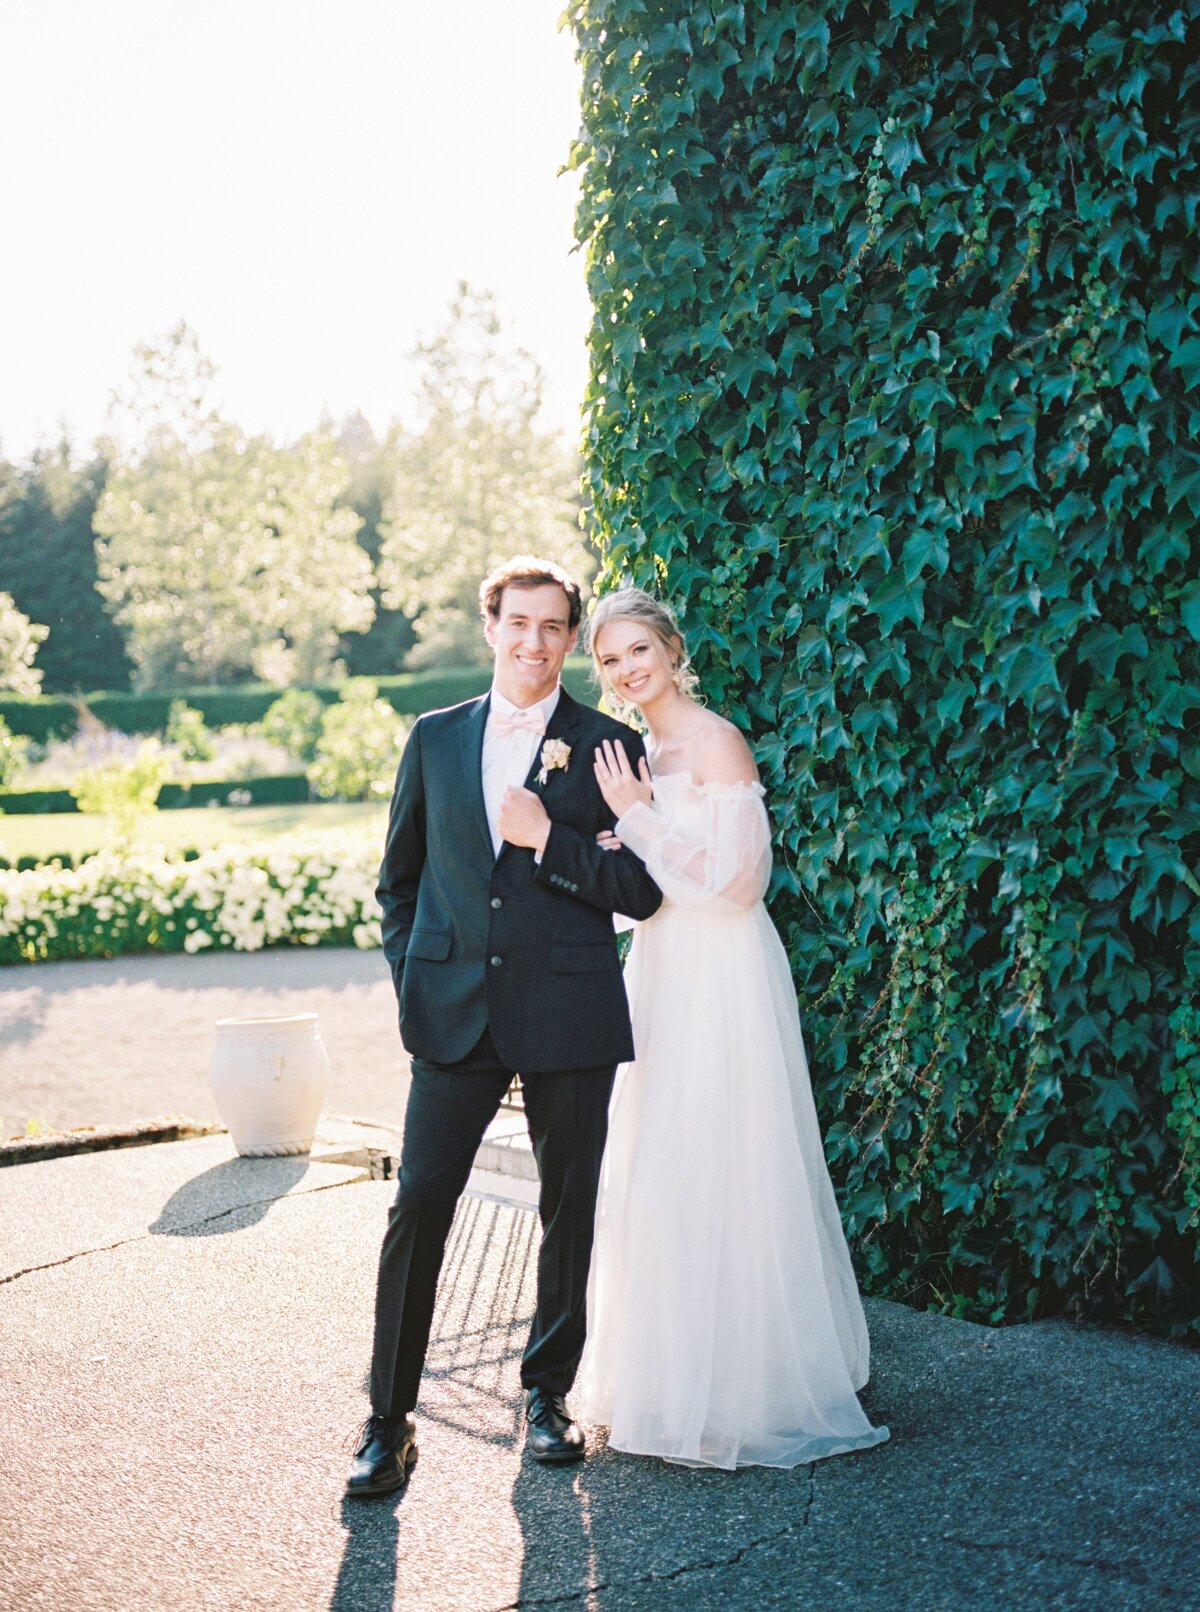 European-Garden-Inspired-Wedding-in-the-PNW-by-Stormy-Peterson-Photography_0001